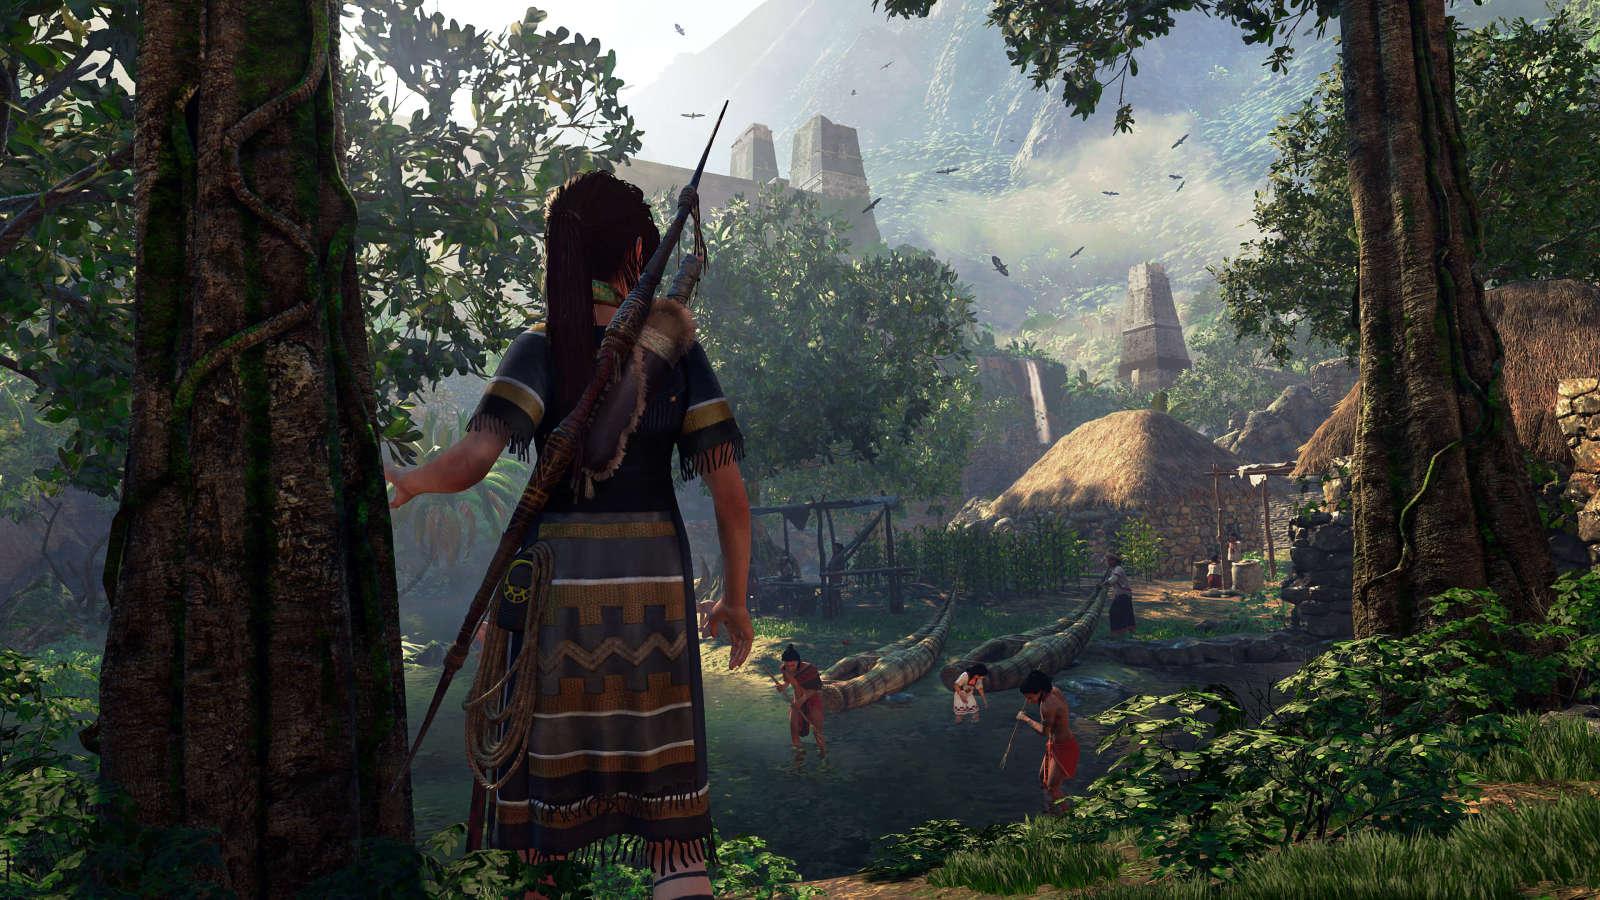 An in-game scene from a Tomb Raider game showing Lara Croft overlooking a peaceful village with thatched huts amidst a lush jungle.